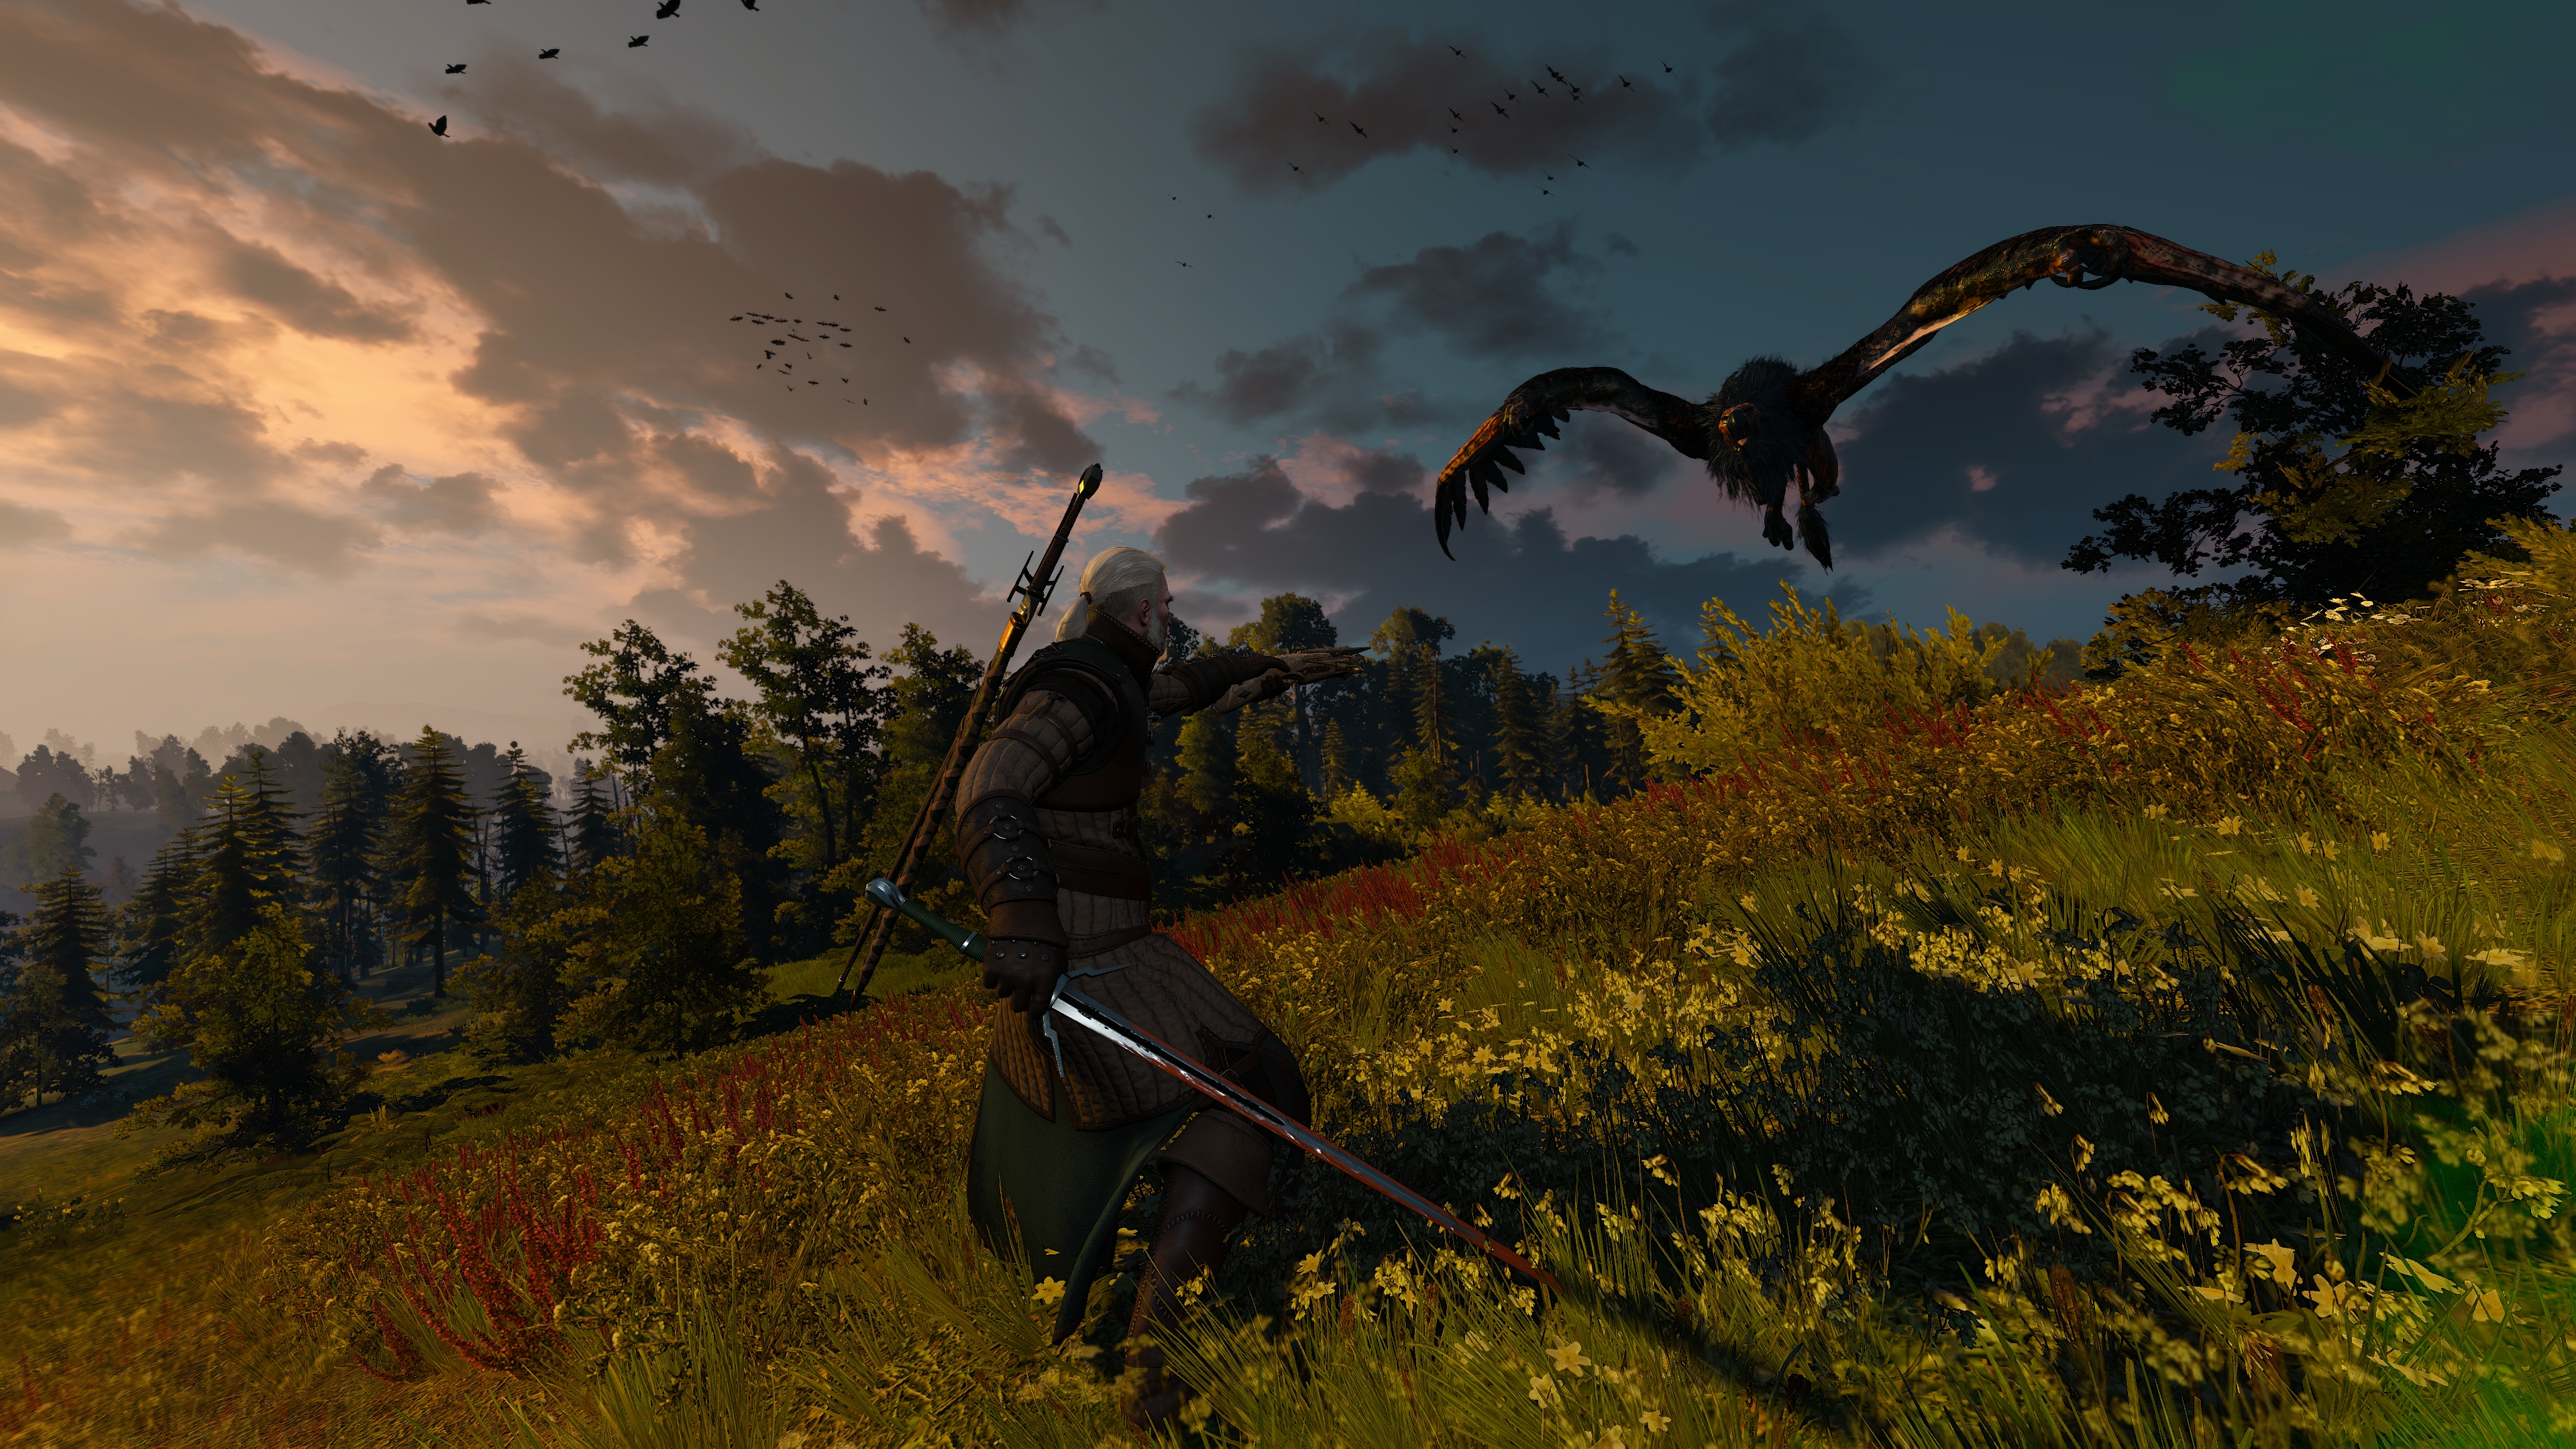 General 3840x2160 The Witcher 3: Wild Hunt Geralt of Rivia screen shot RPG video games PC gaming